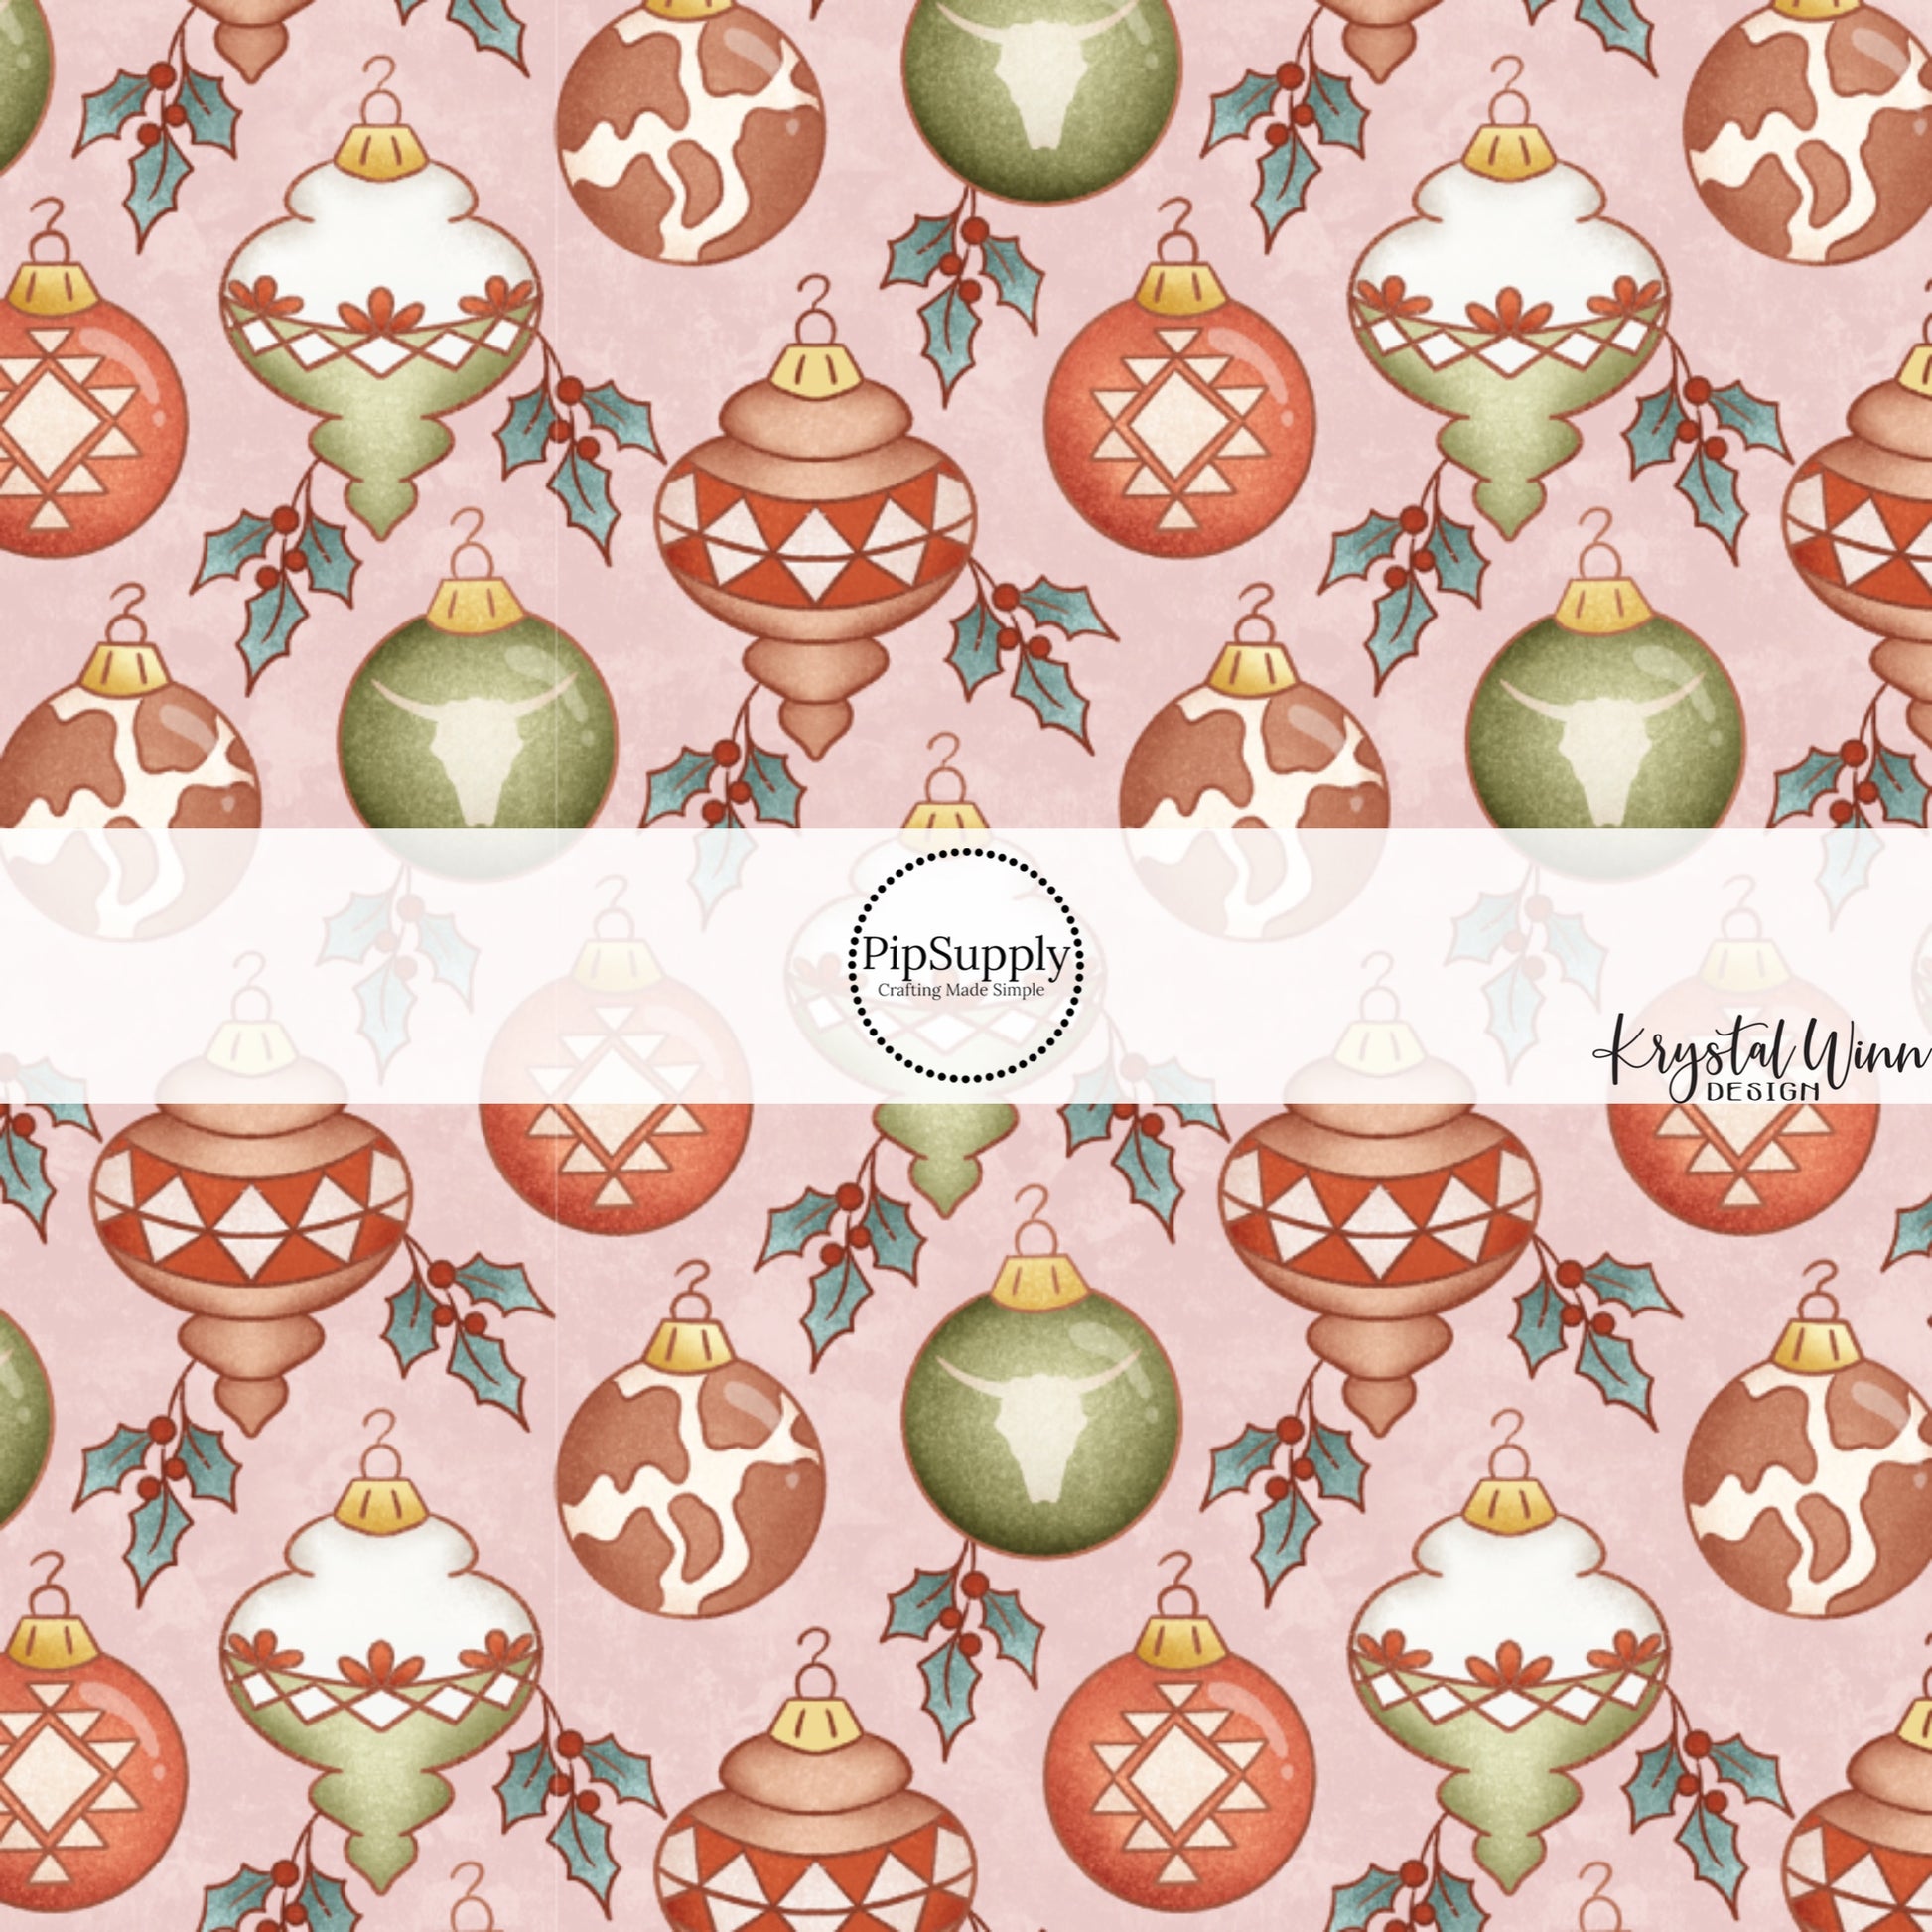 These holiday pattern themed fabric by the yard features Western themed Christmas ornaments on light pink. This fun Christmas fabric can be used for all your sewing and crafting needs!